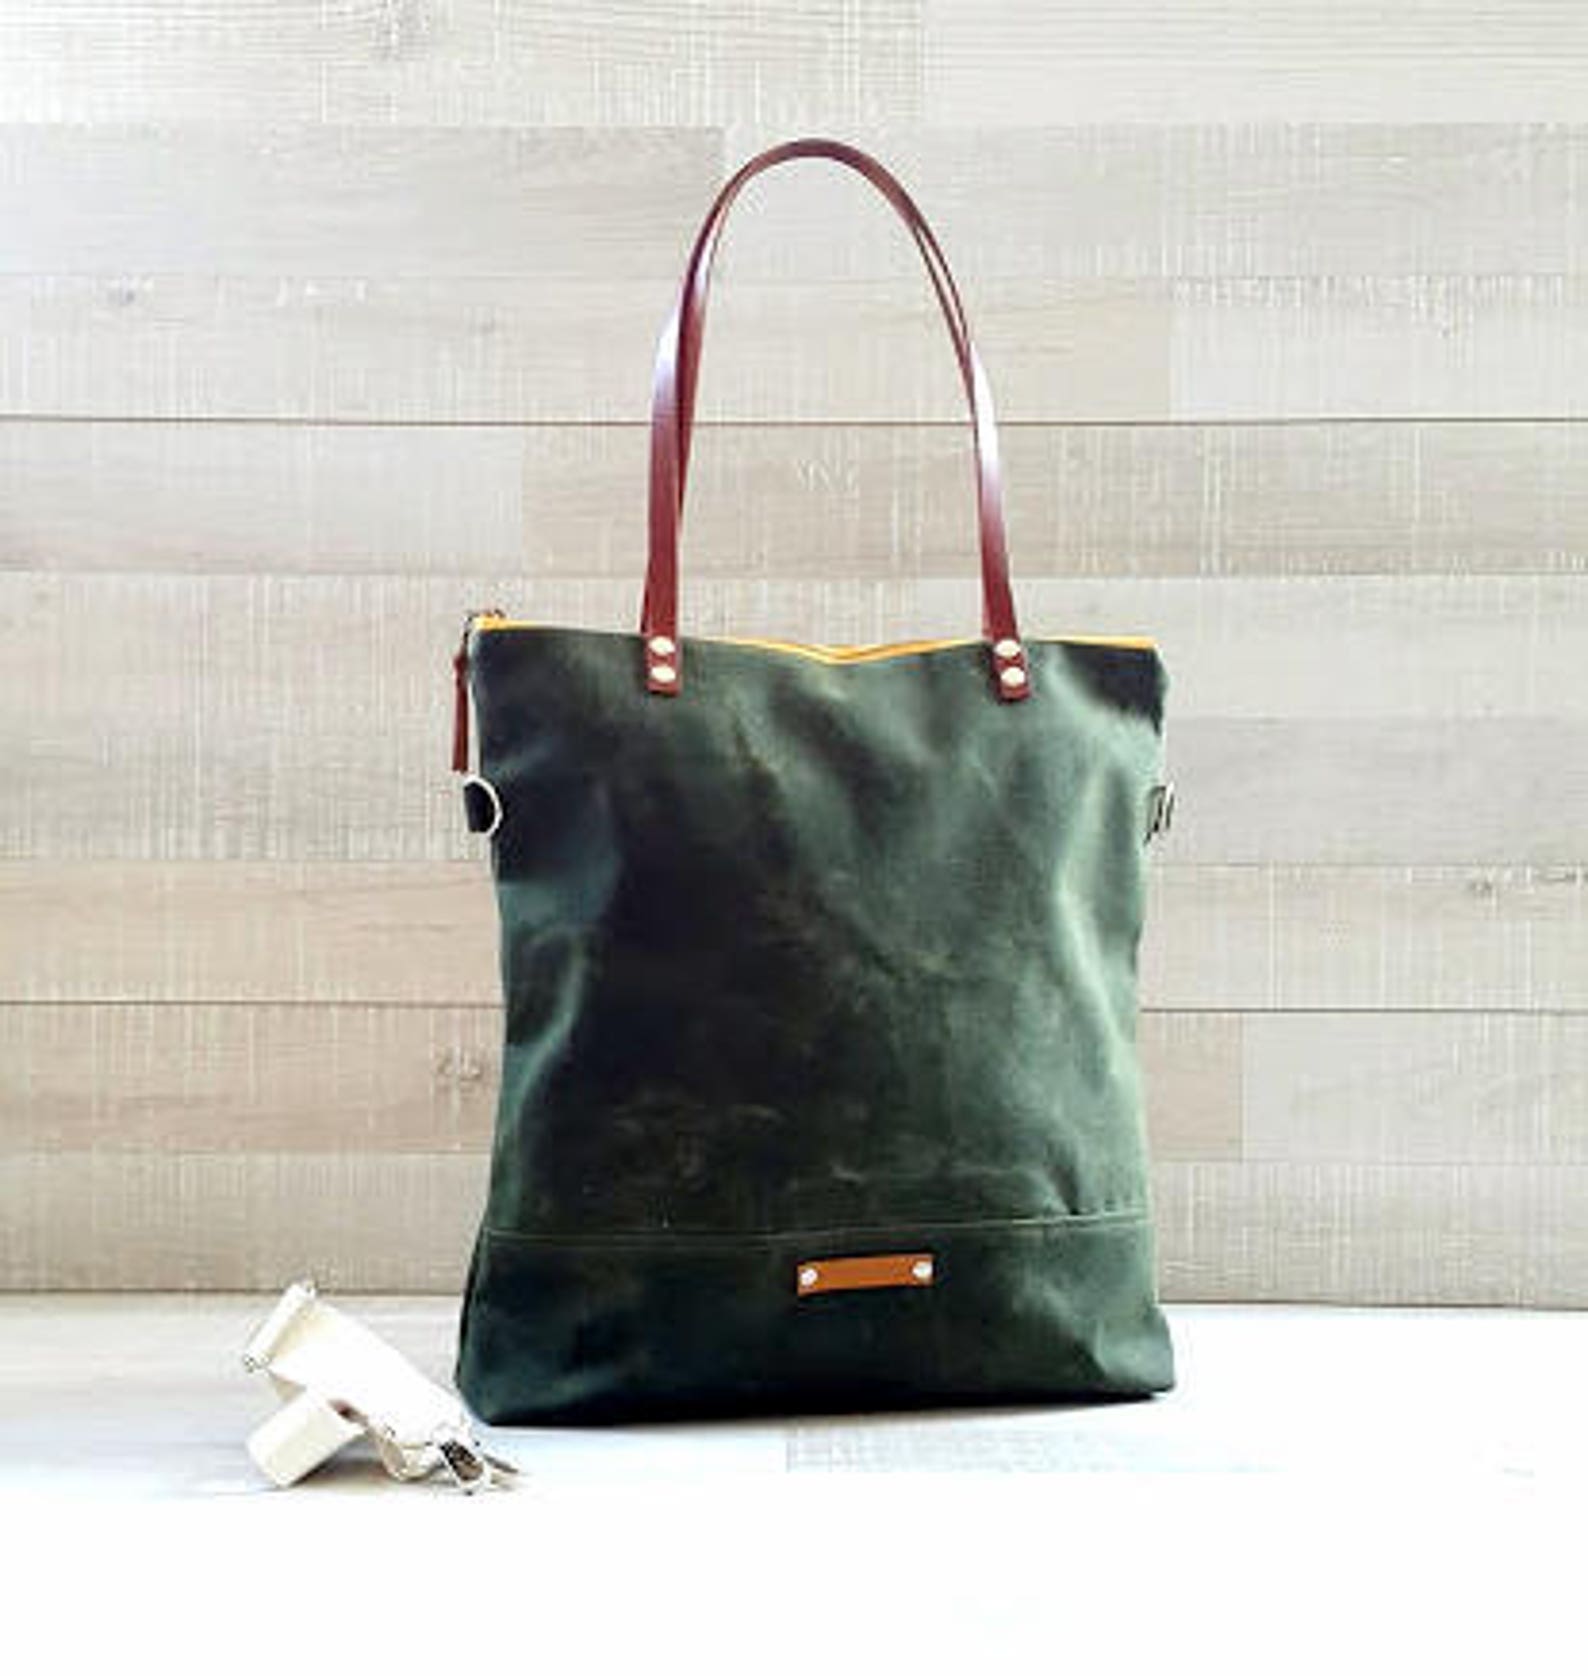 Waxed Canvas Tote Bag in Dark Forest Green Milano - Etsy